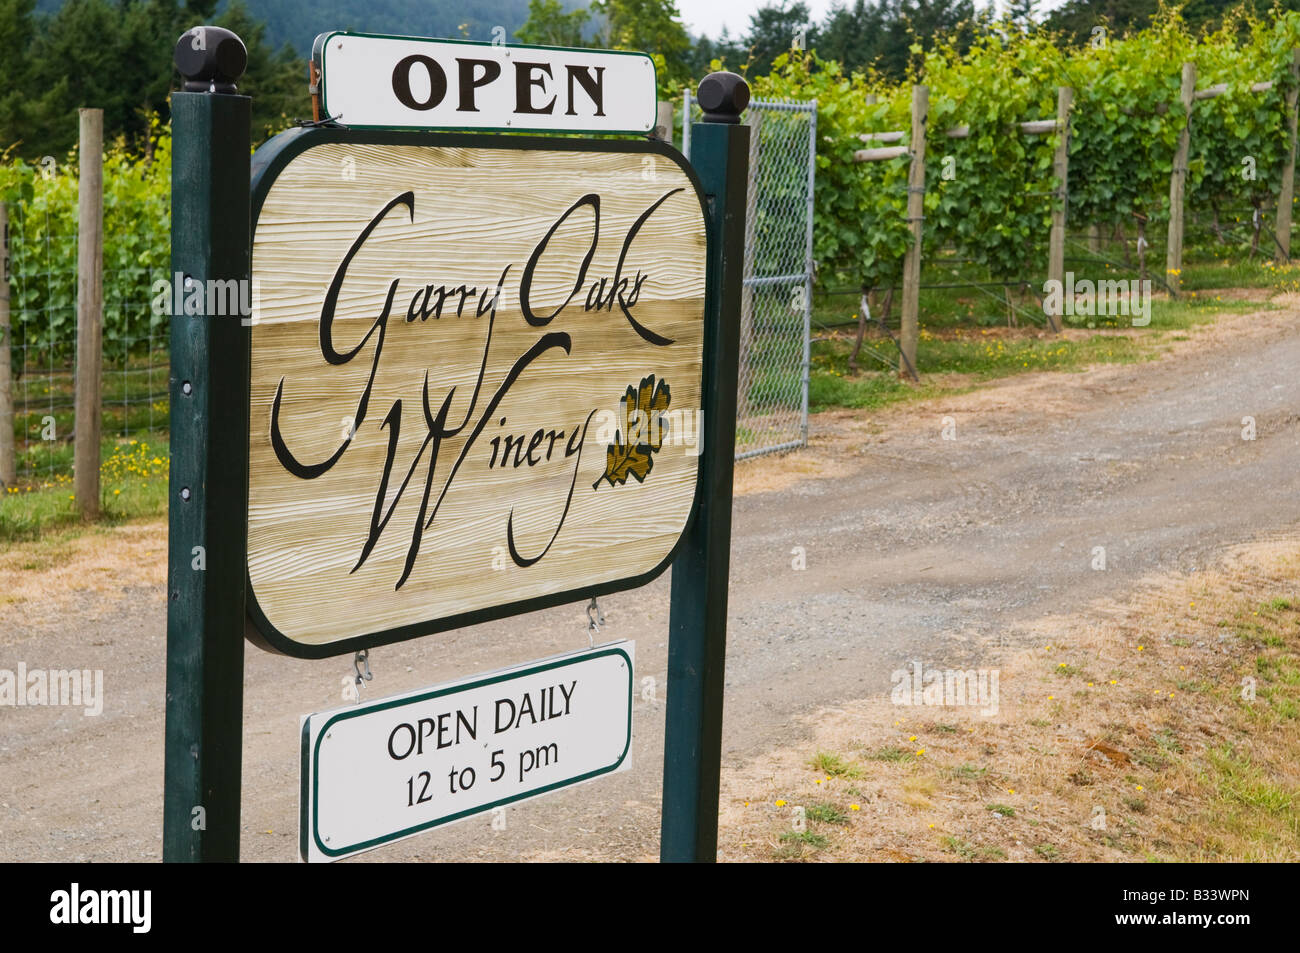 'The famous Garry Oaks winery in Salt Spring Island British Columbia Canada' Stock Photo